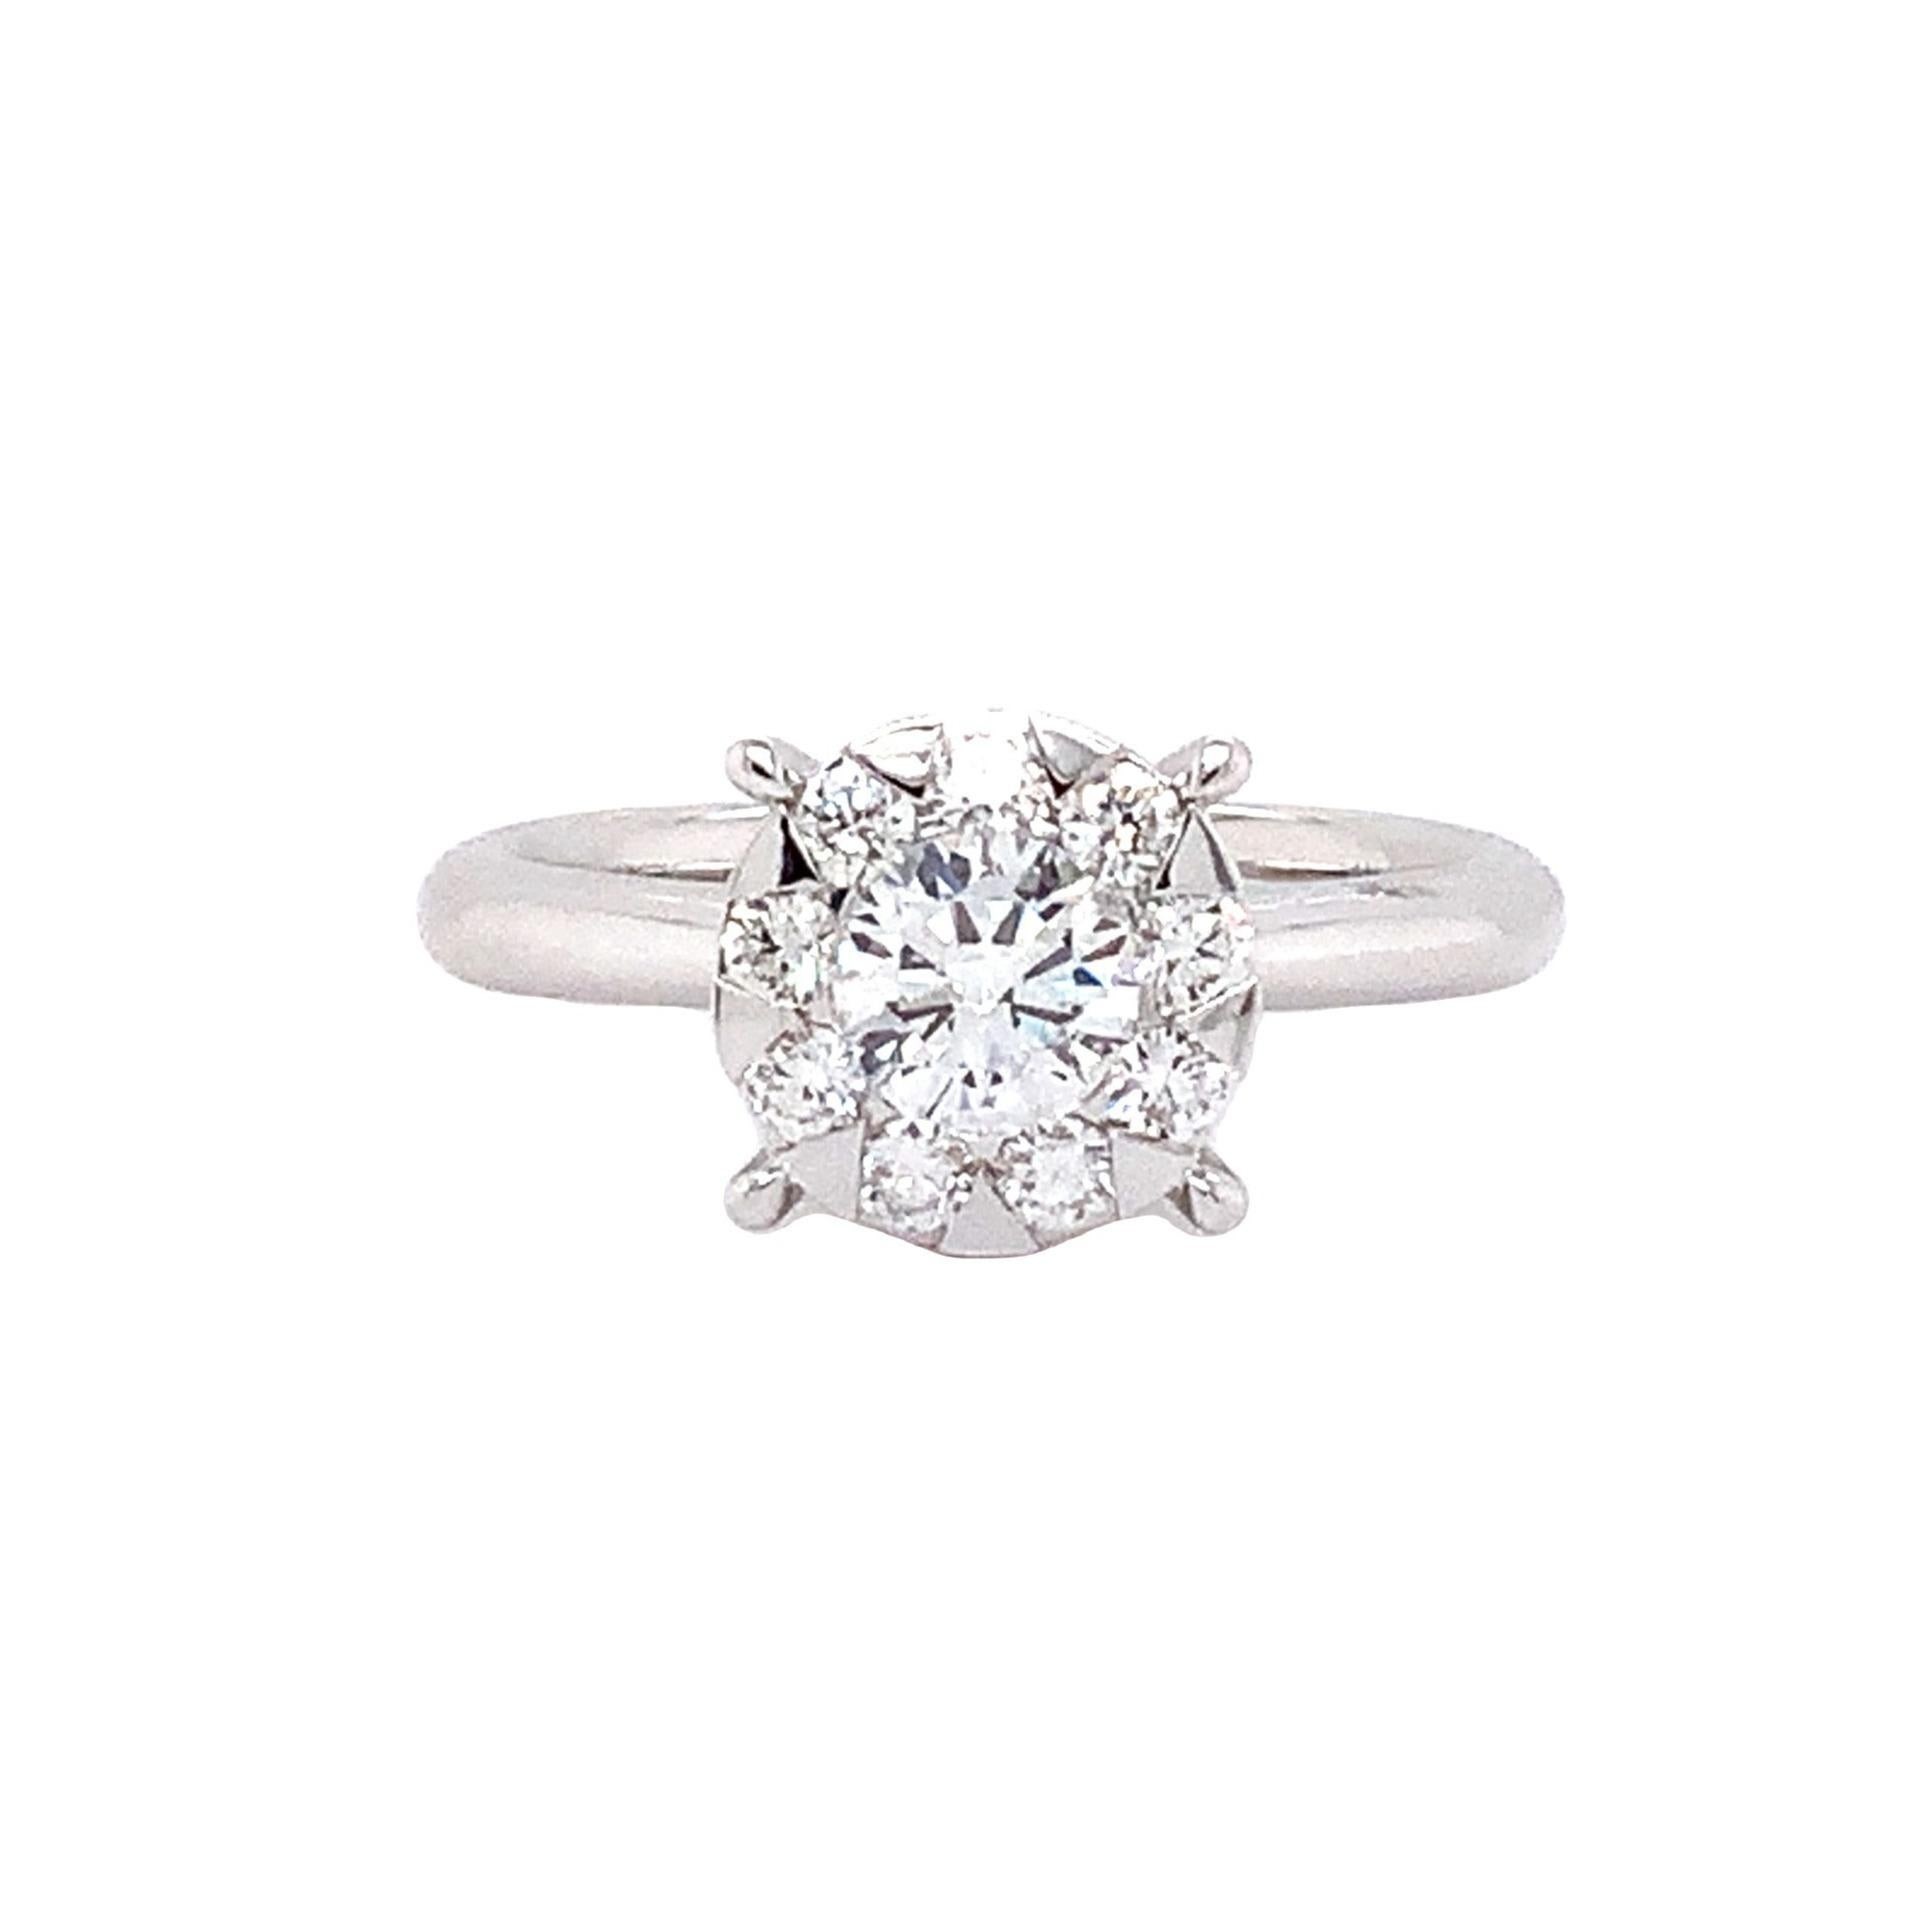 Modern Memoire Bouquets Collection Engagement Diamond Ring 0.87ctw Looks like a 3 Car For Sale